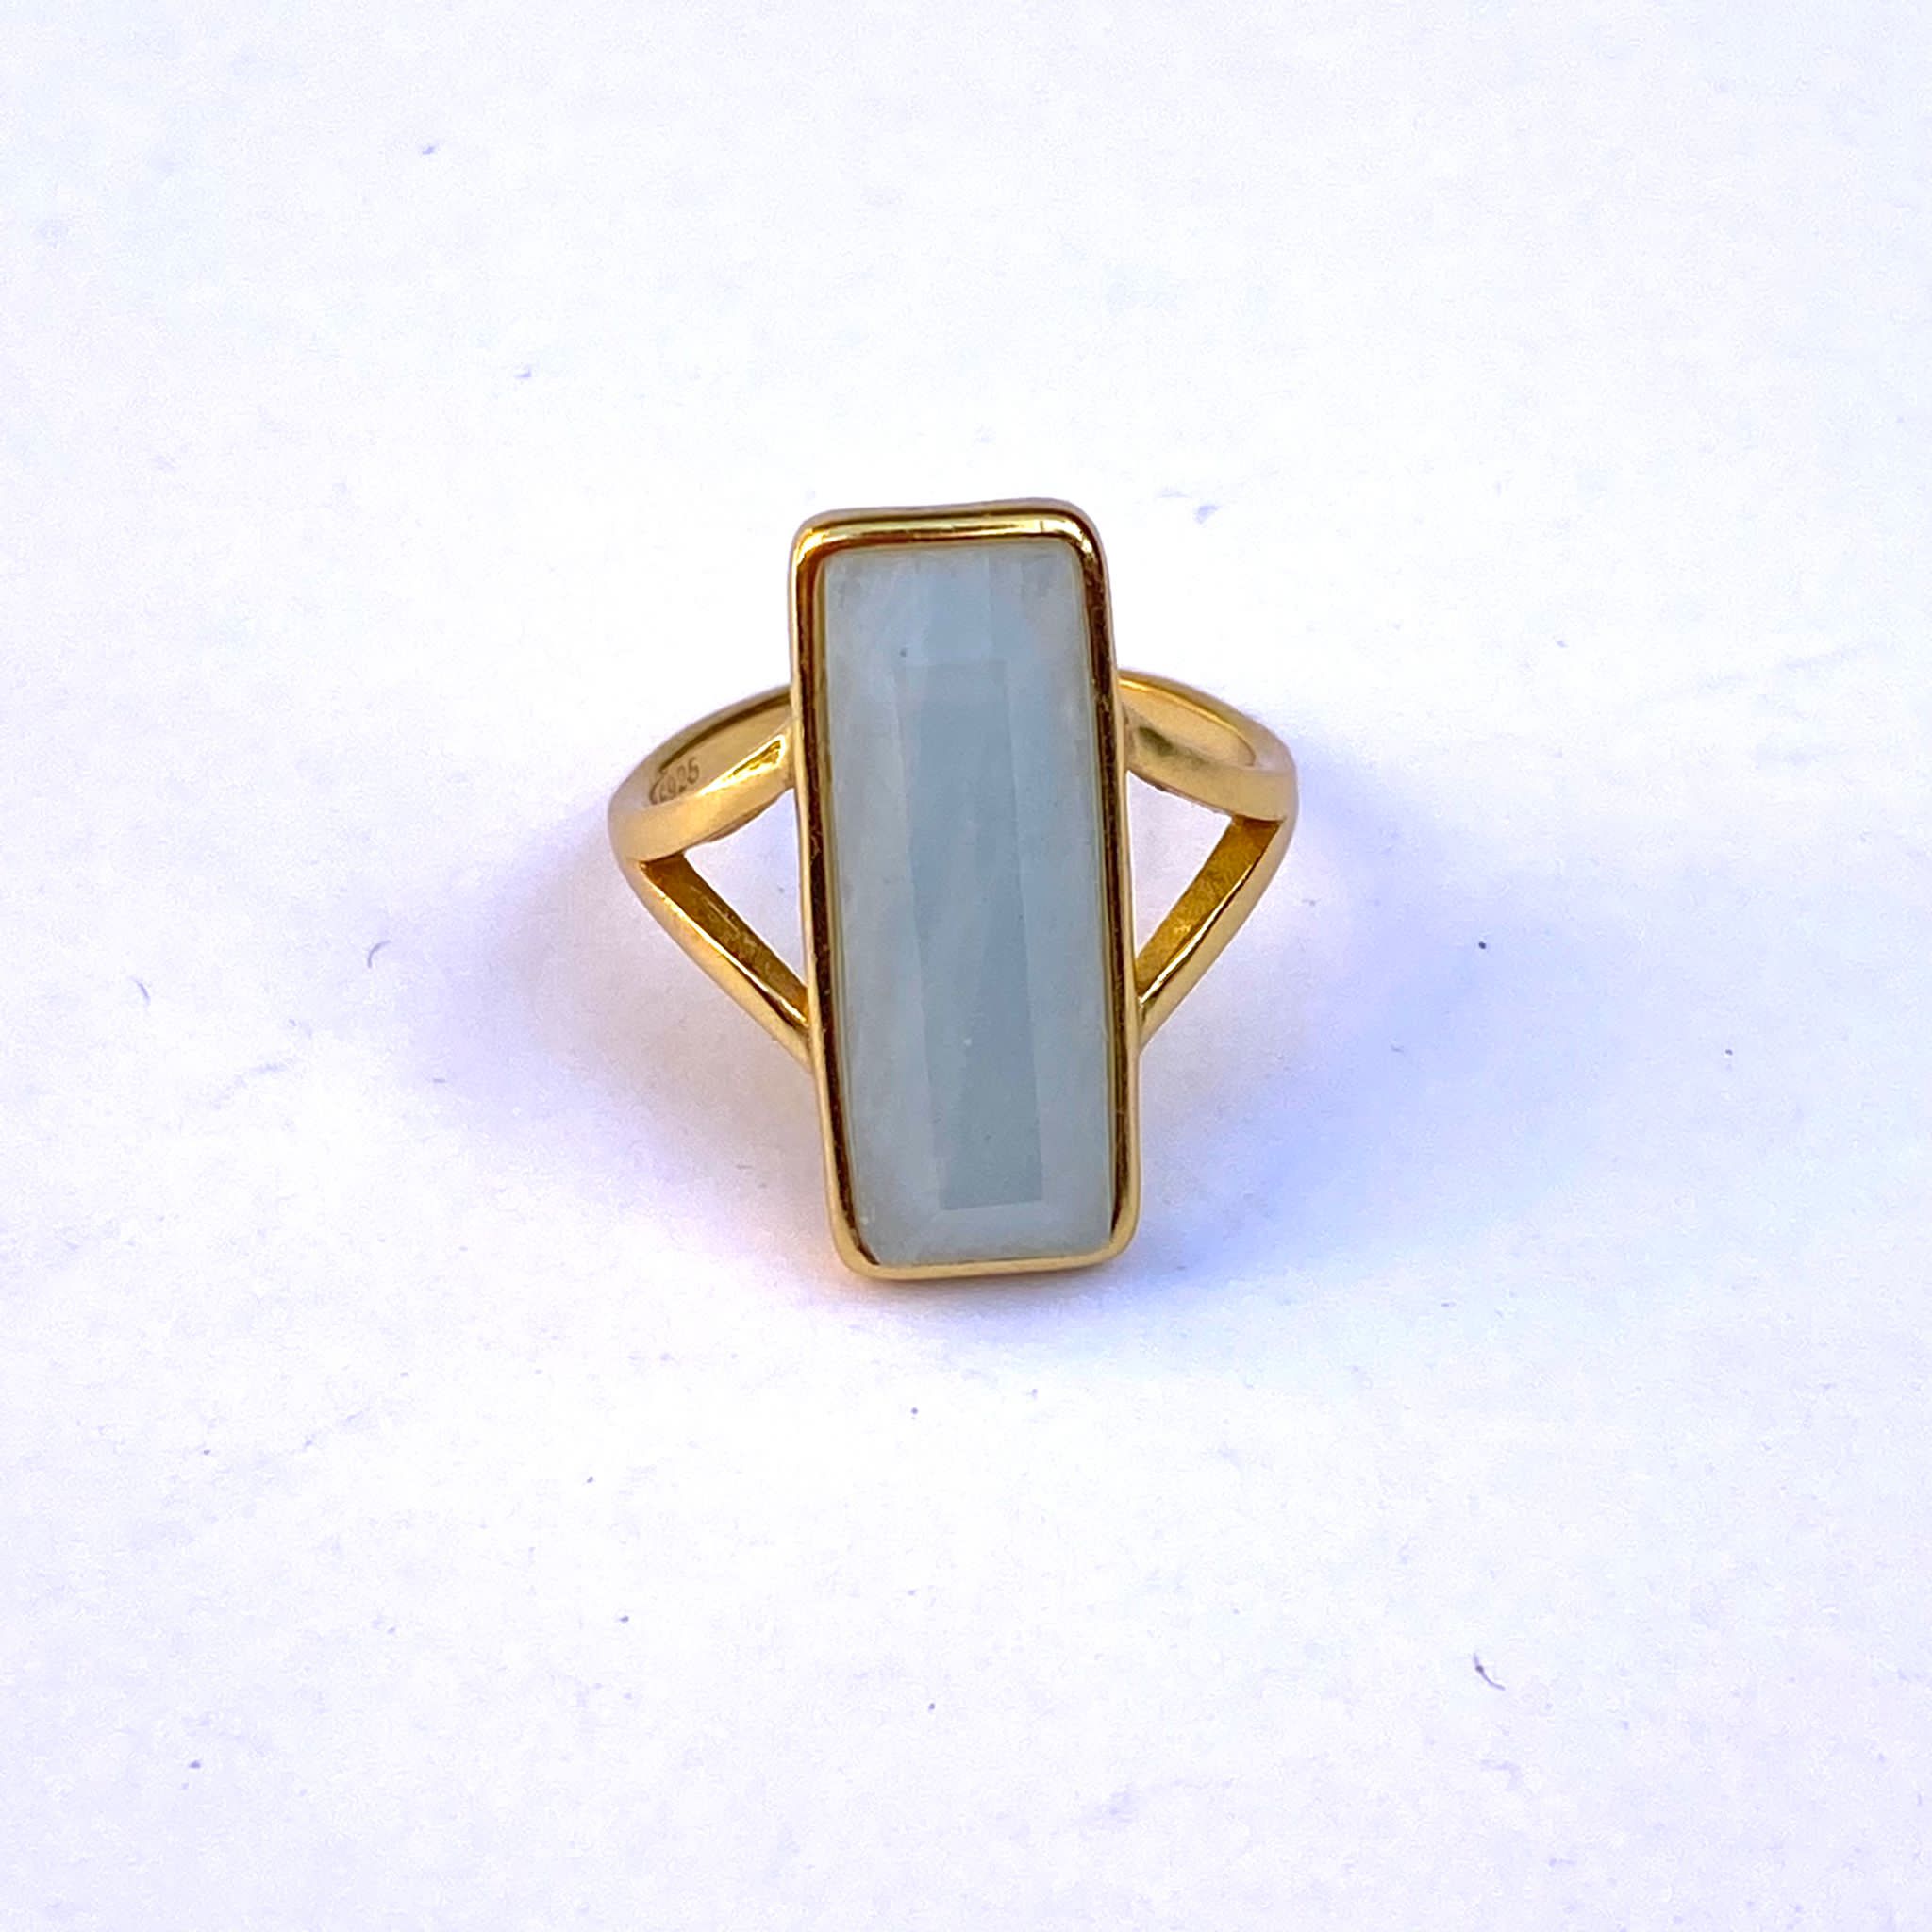 Stainless Steel Rectangle Ring, Gold Rectangle Link Design, Sizes 6-10,  Simple Geometric Ring, Rectangles Band, Shape Ring, Link Ring